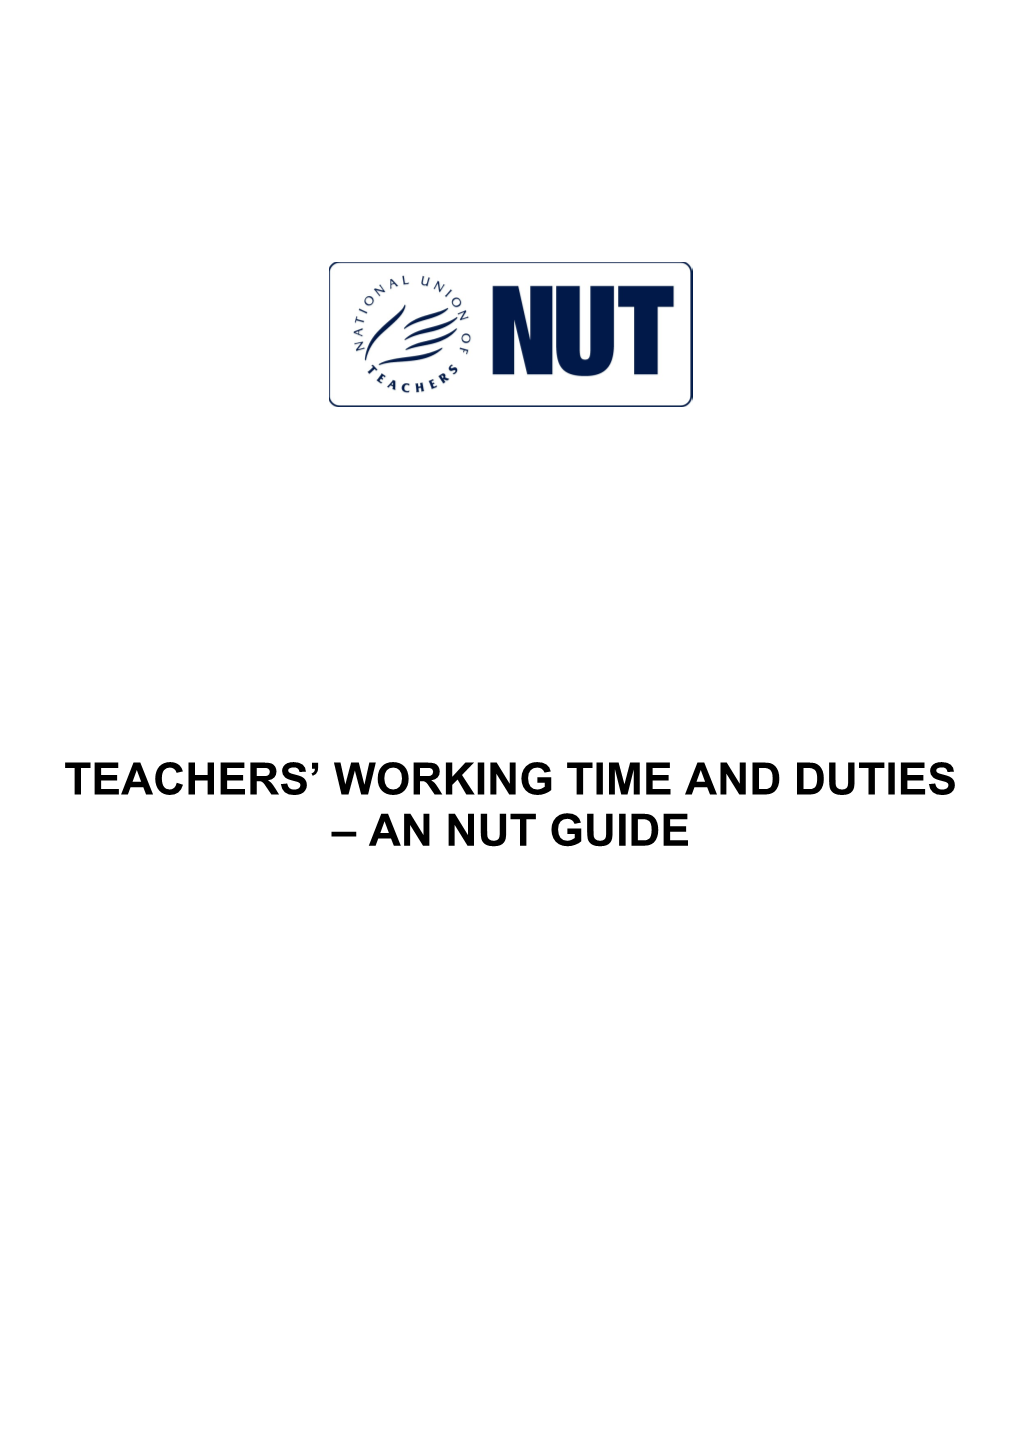 Teachers Working Time and Duties an Nut Guide